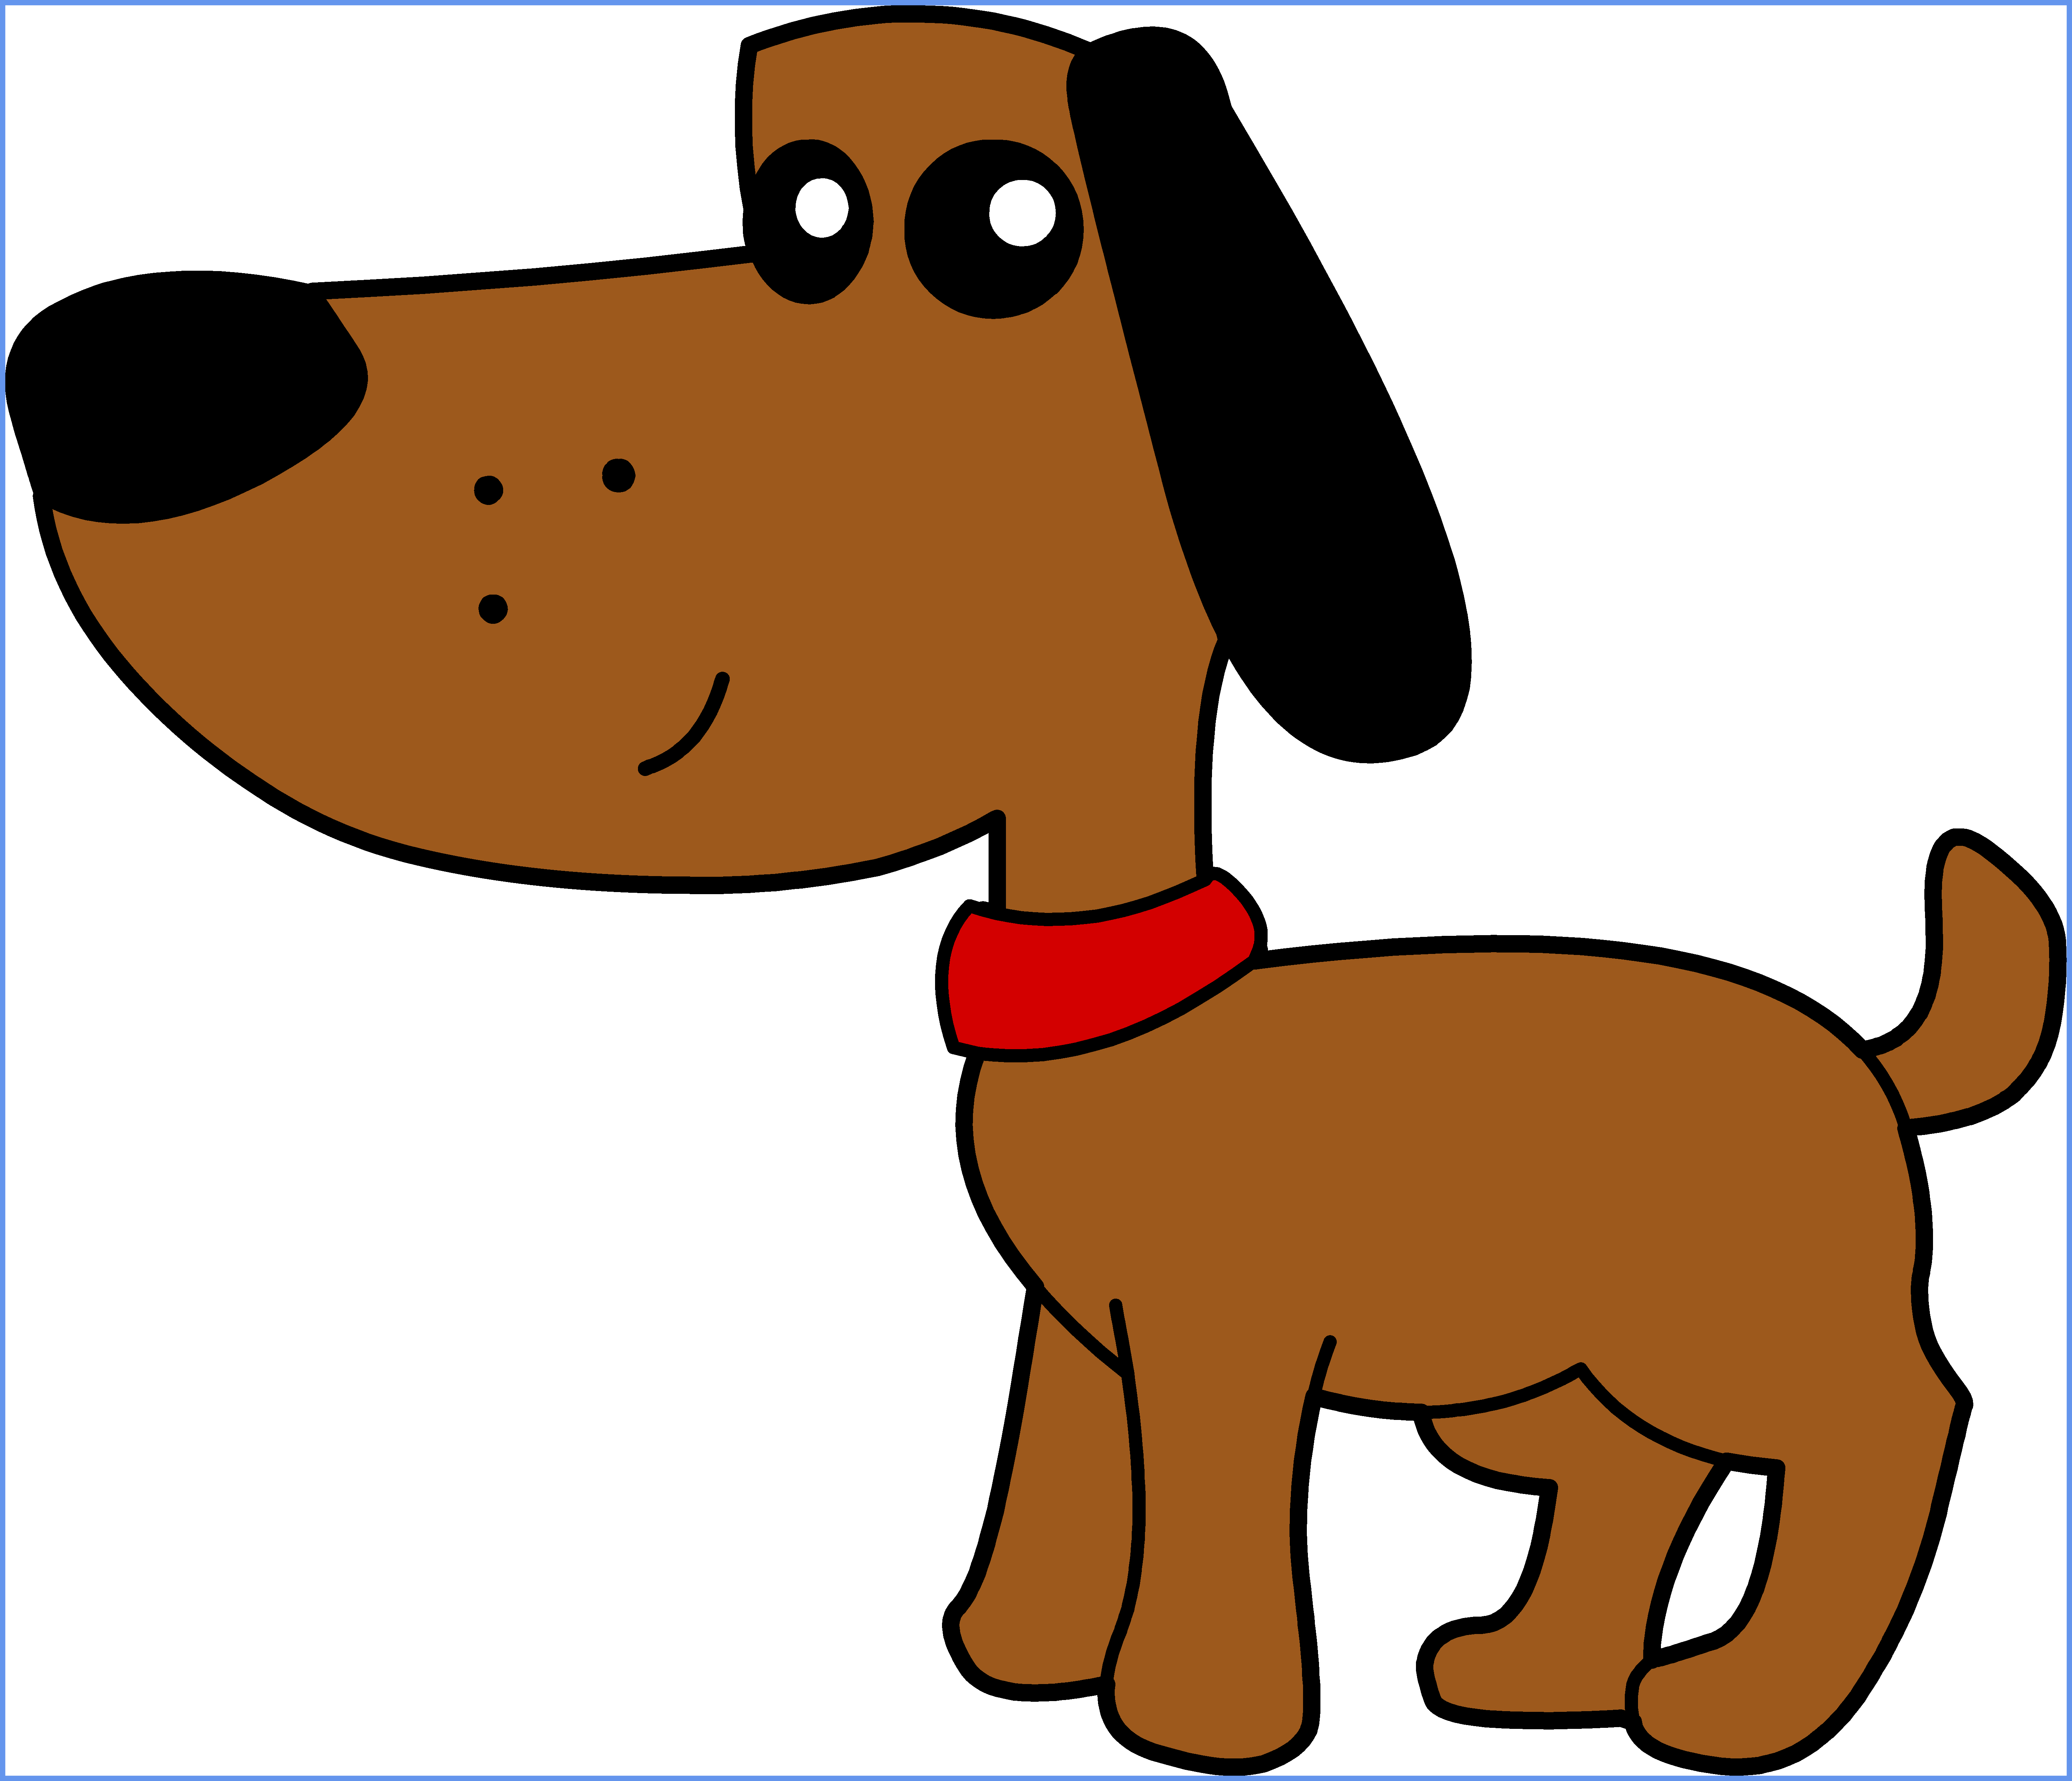 Cute at getdrawings com. Clipart dog spring